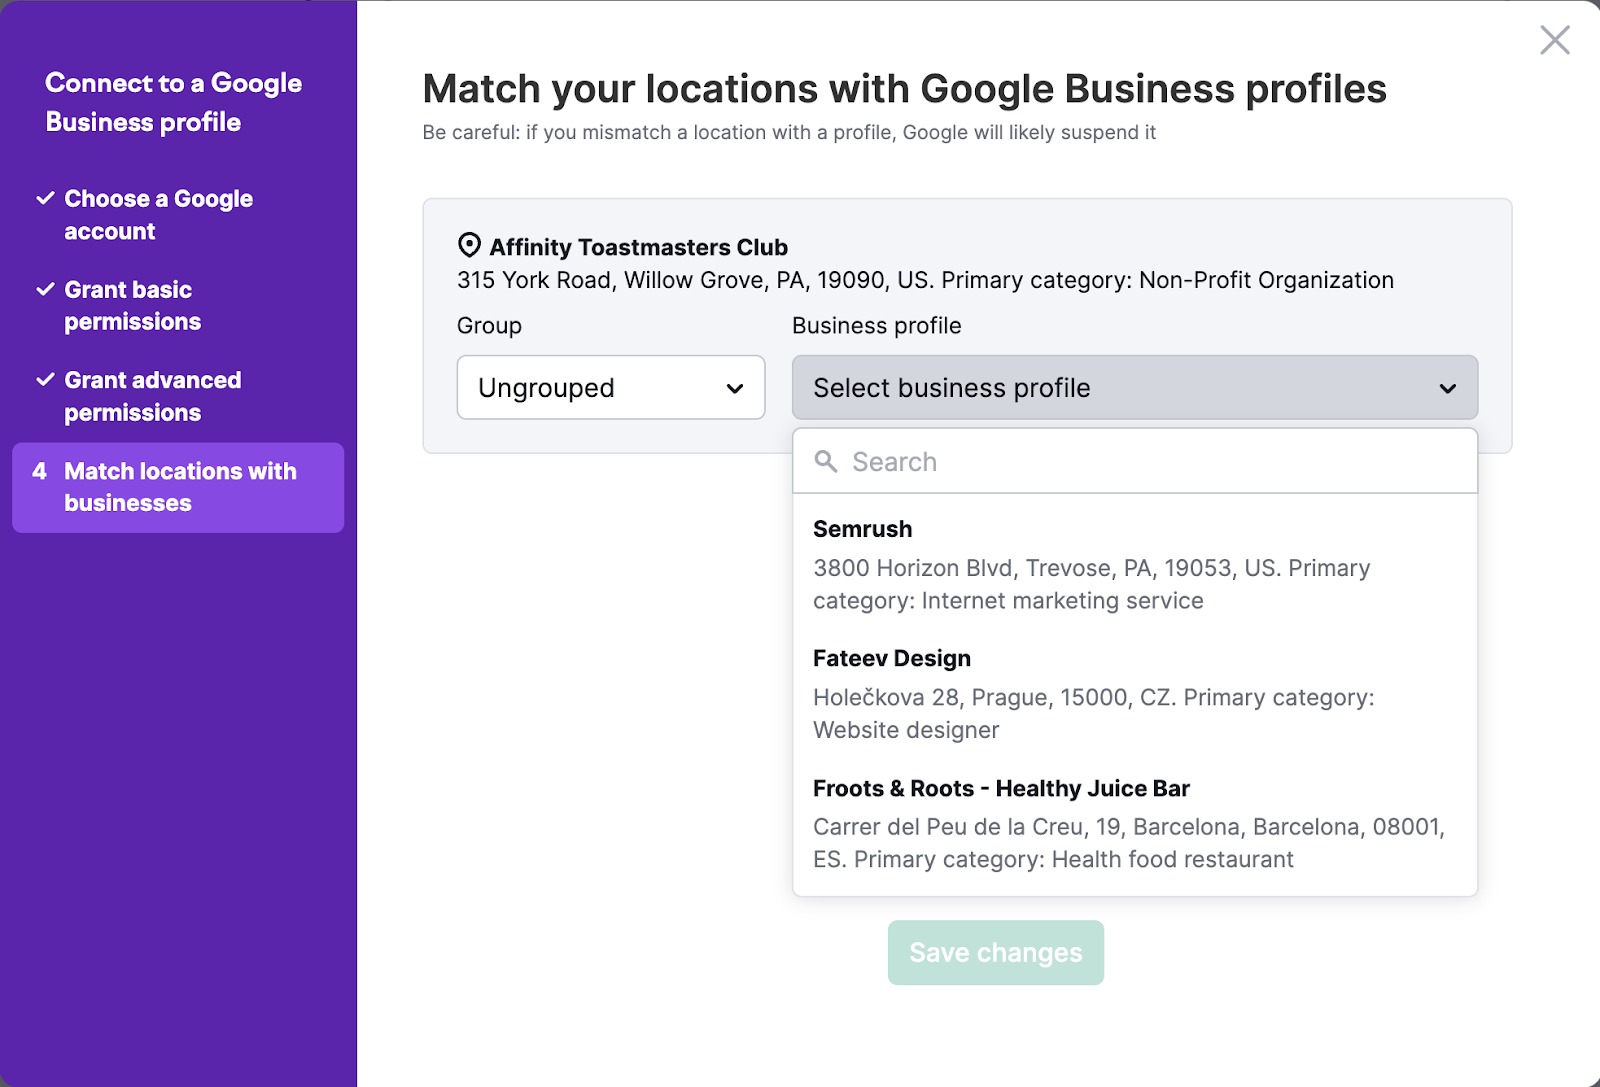 The settings pop-up screen shows the matching business profile.